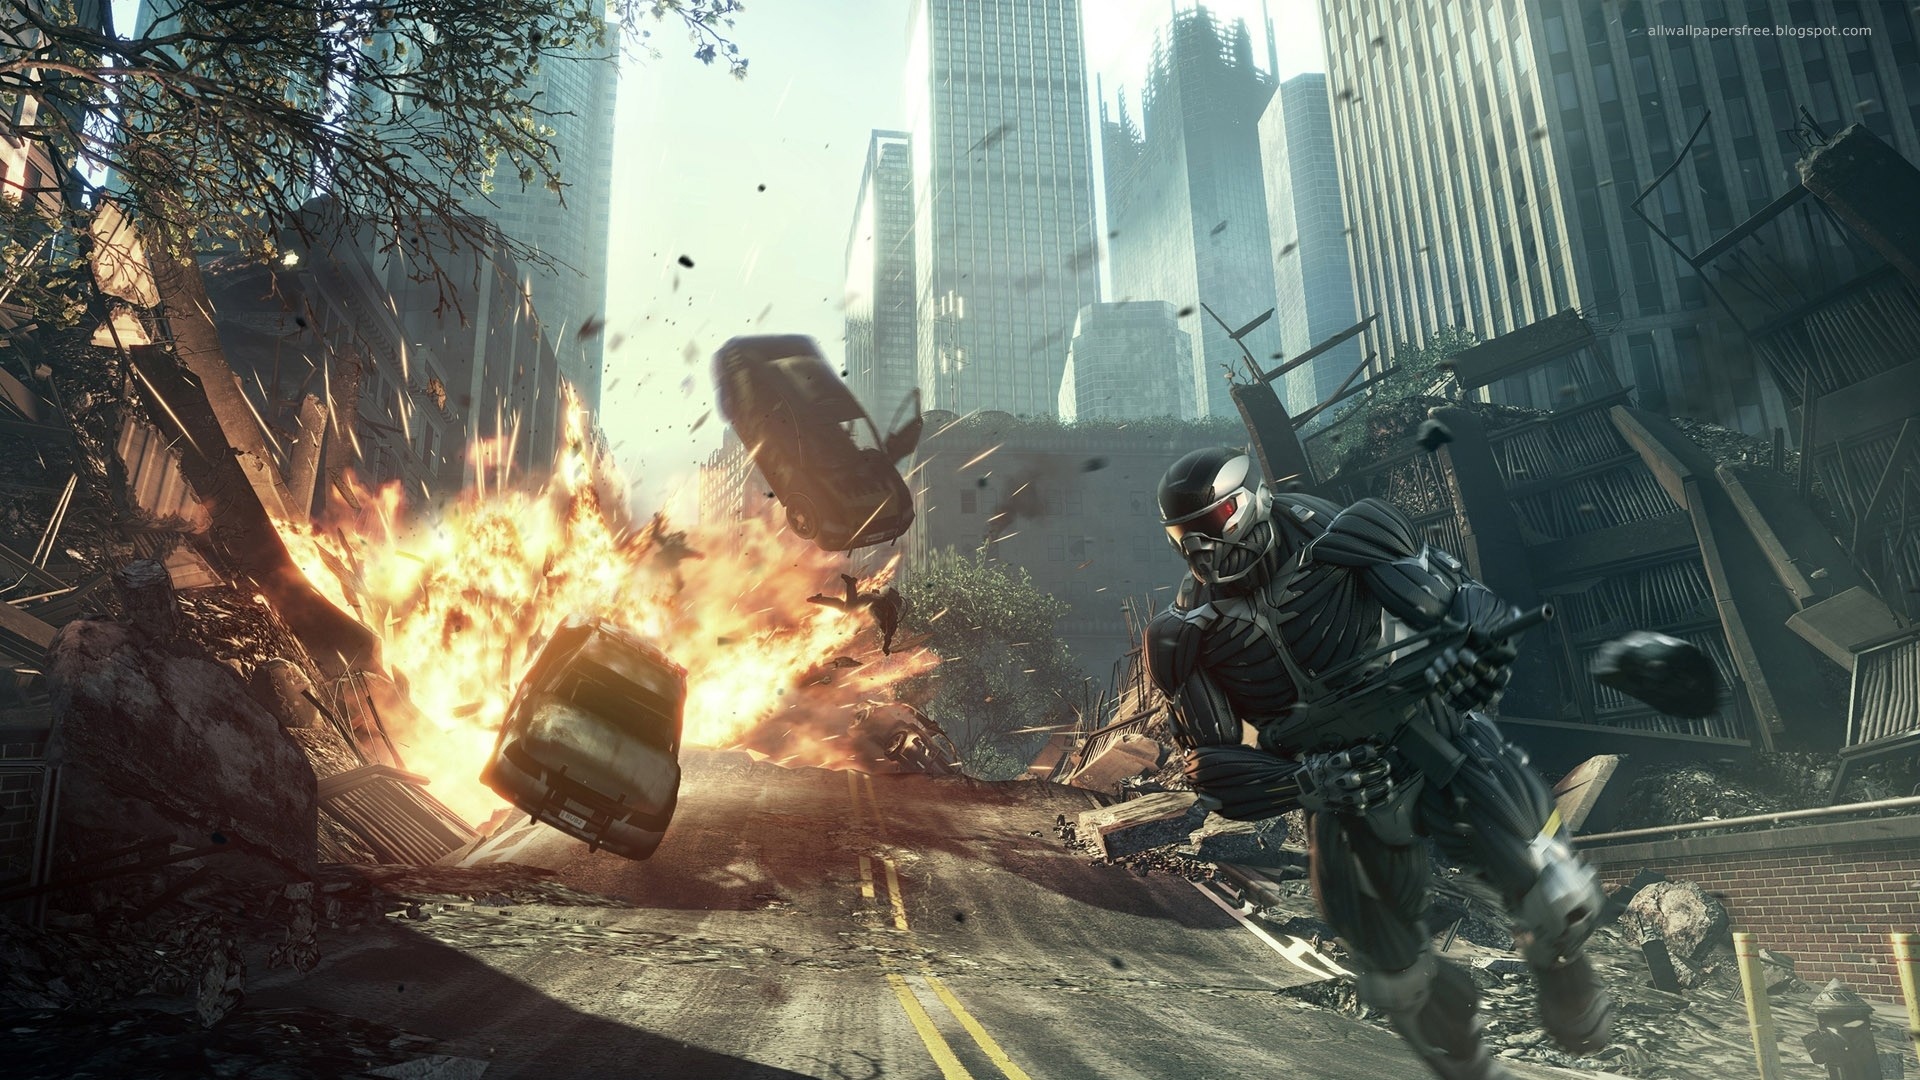 Download Wallpaper 1920x1080 crysis, road, explosion, car, city ...